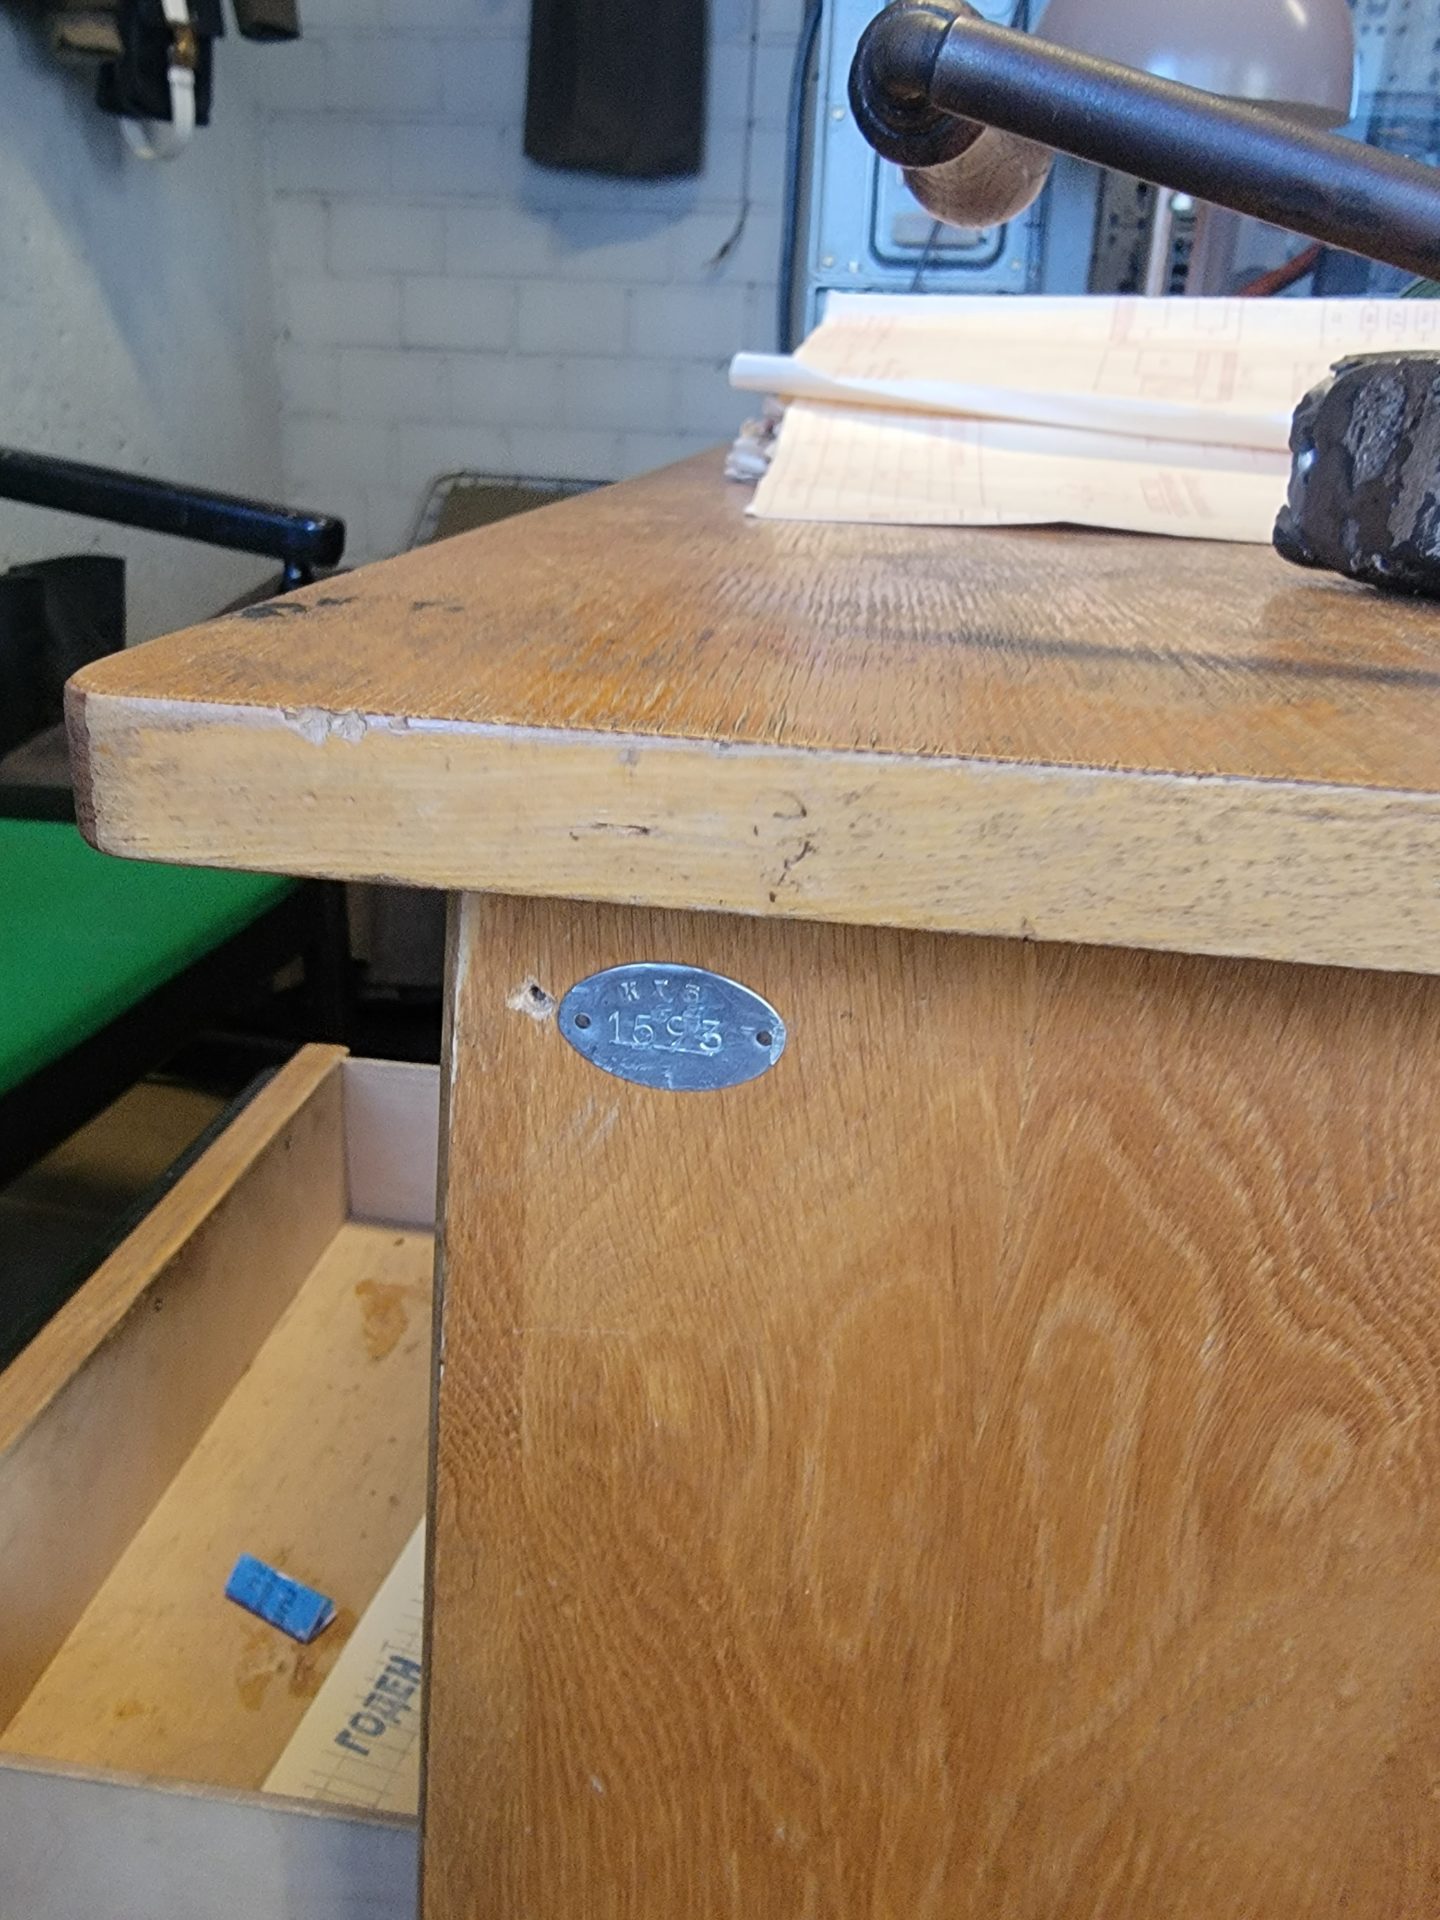 a wooden desk with a metal tag on it